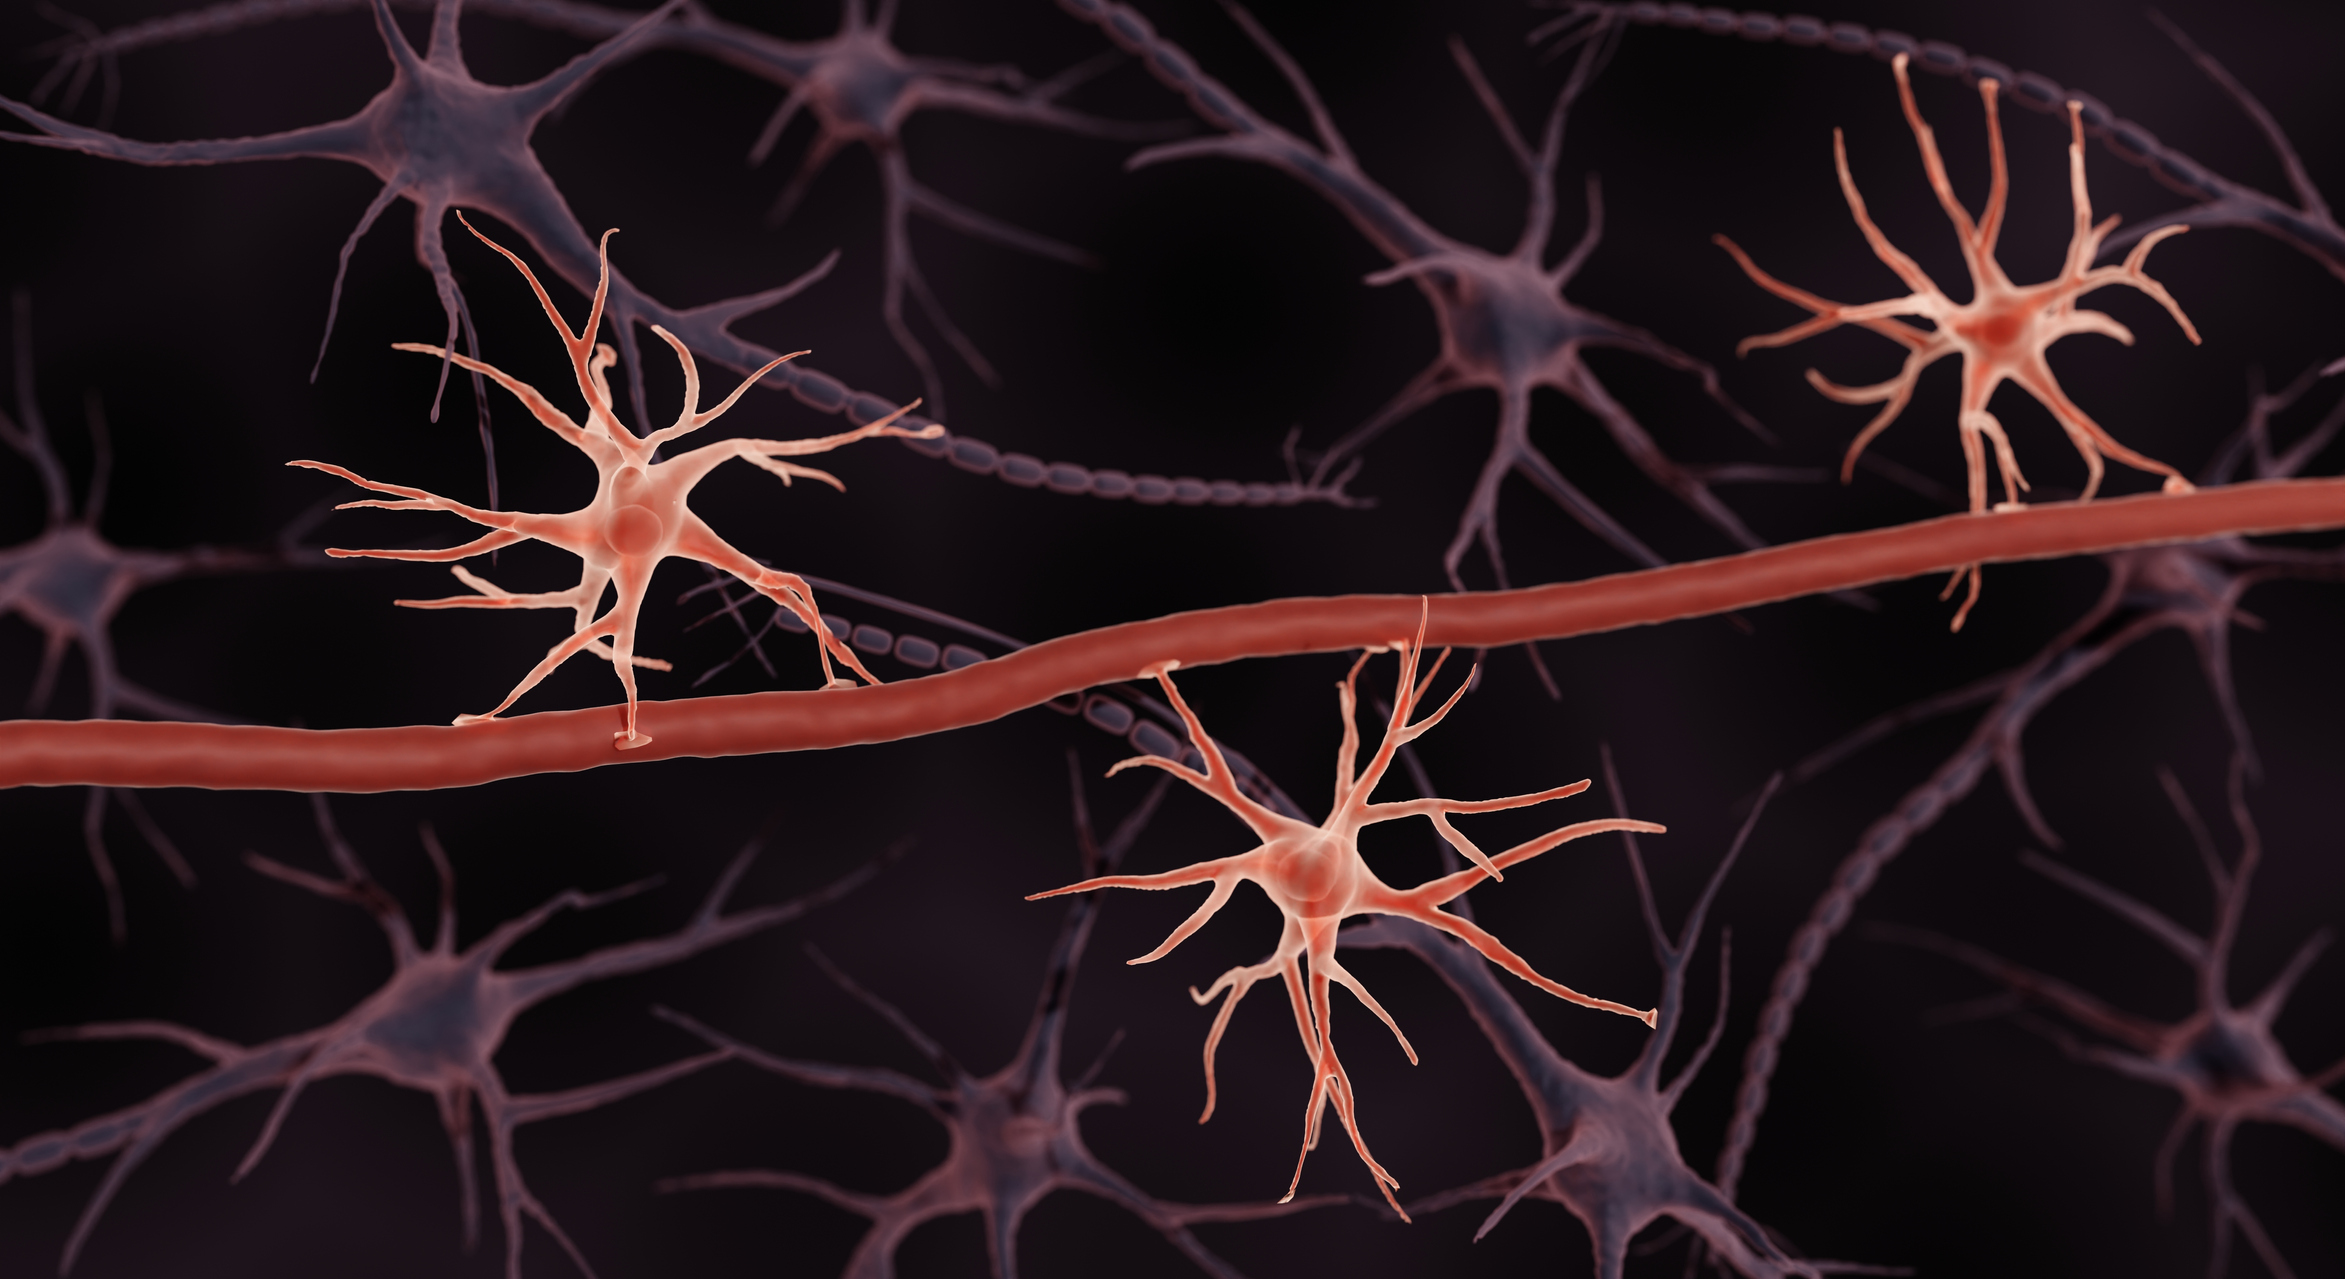 Researchers Uncover New Blood Biomarker Predicting Alzheimer’s Development in the Cognitively Healthy